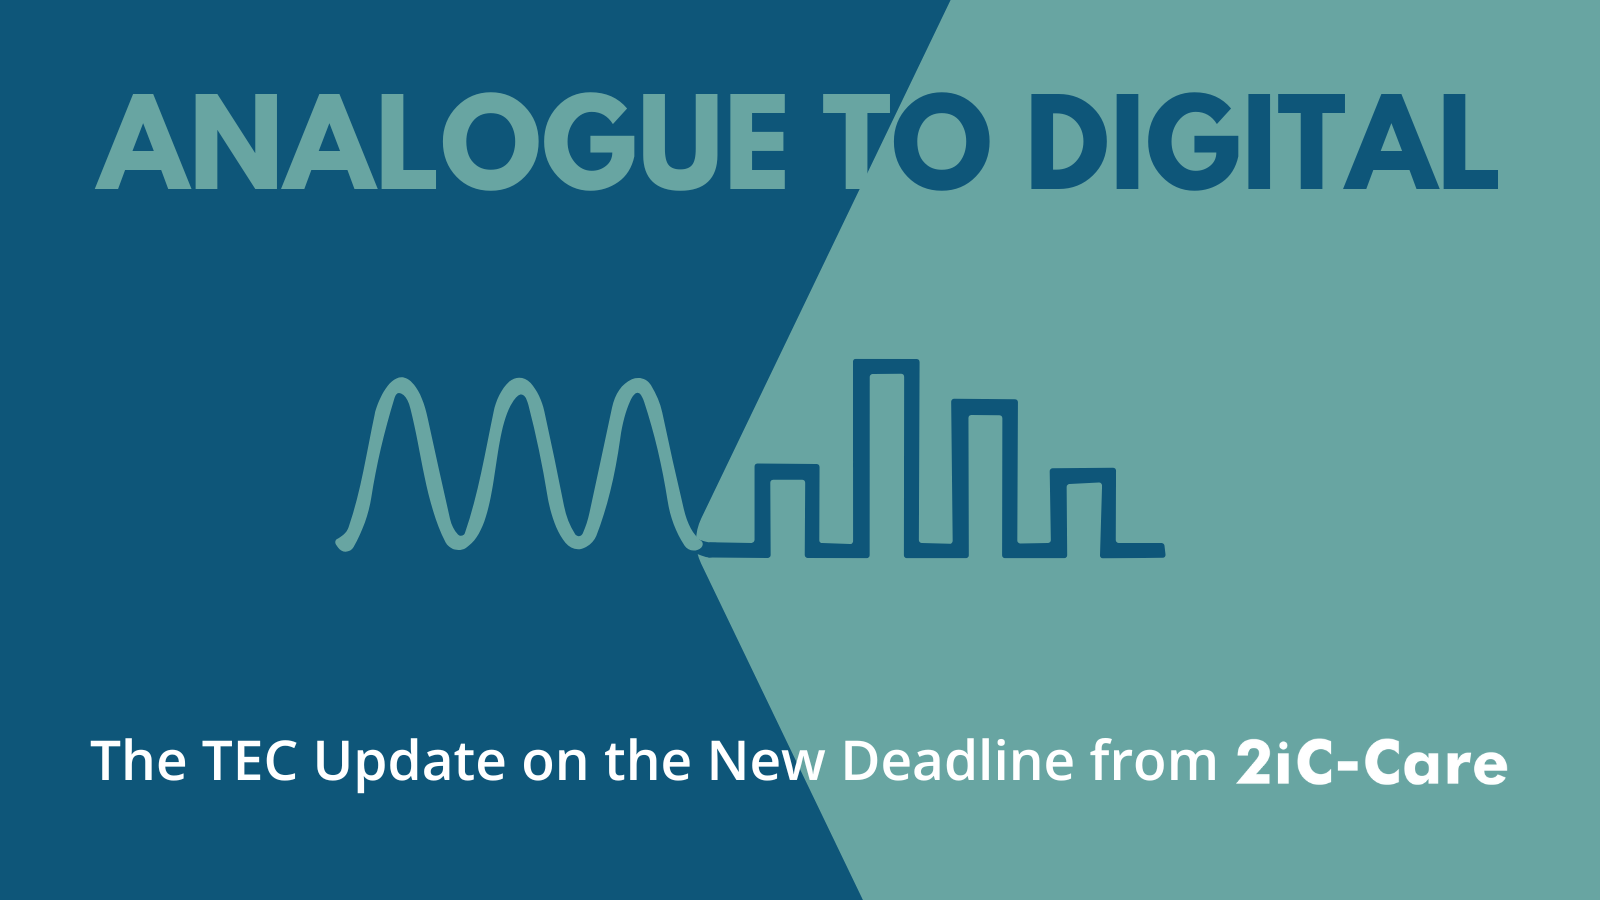 News on the Analogue to Digital Technology Enabled Care Transition